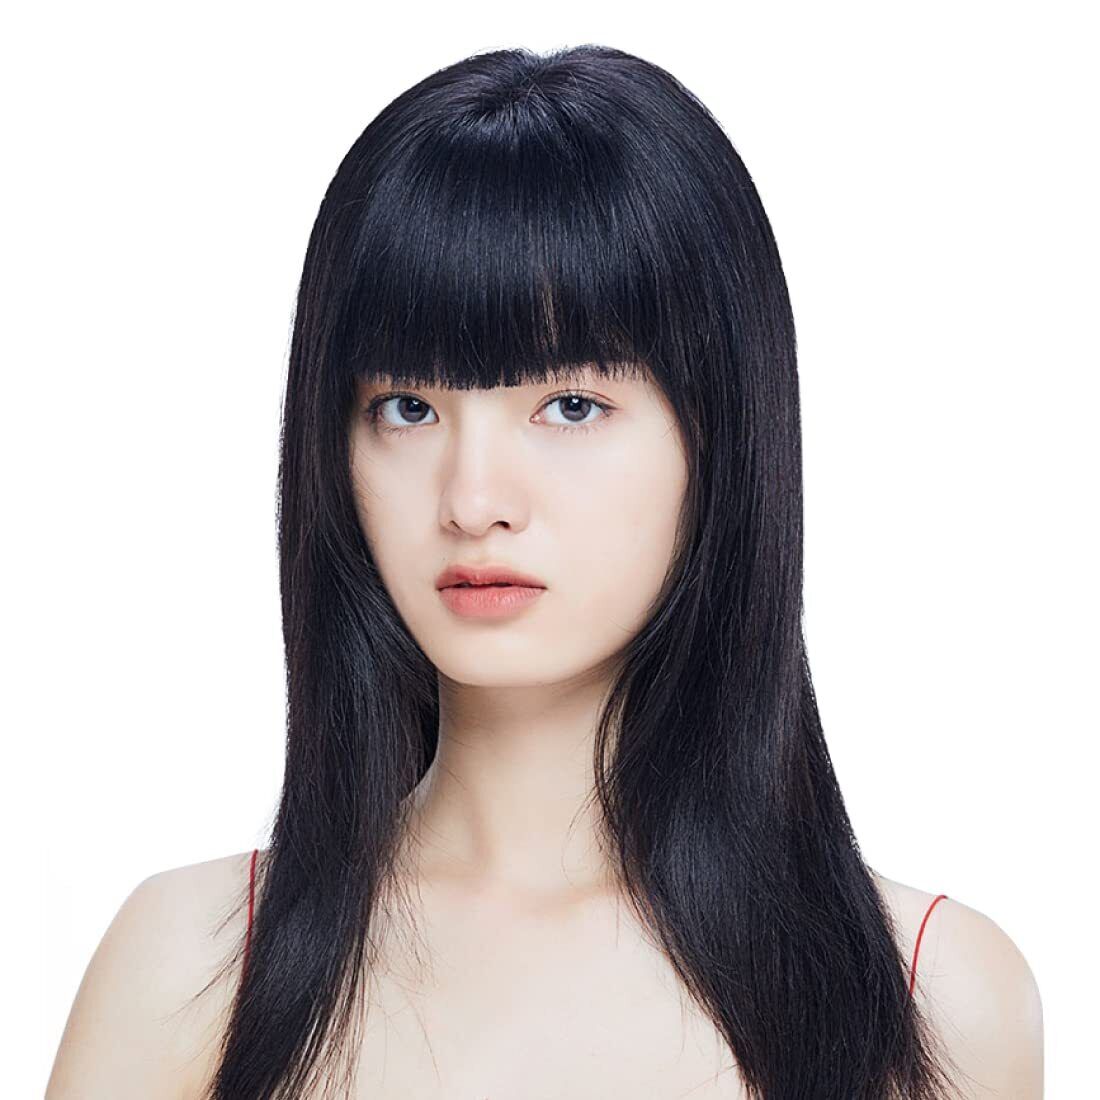 HIYE Partial Wig, 100% Human Hair, Skin Colored Synthetic Scalp, Fully Hand-plan